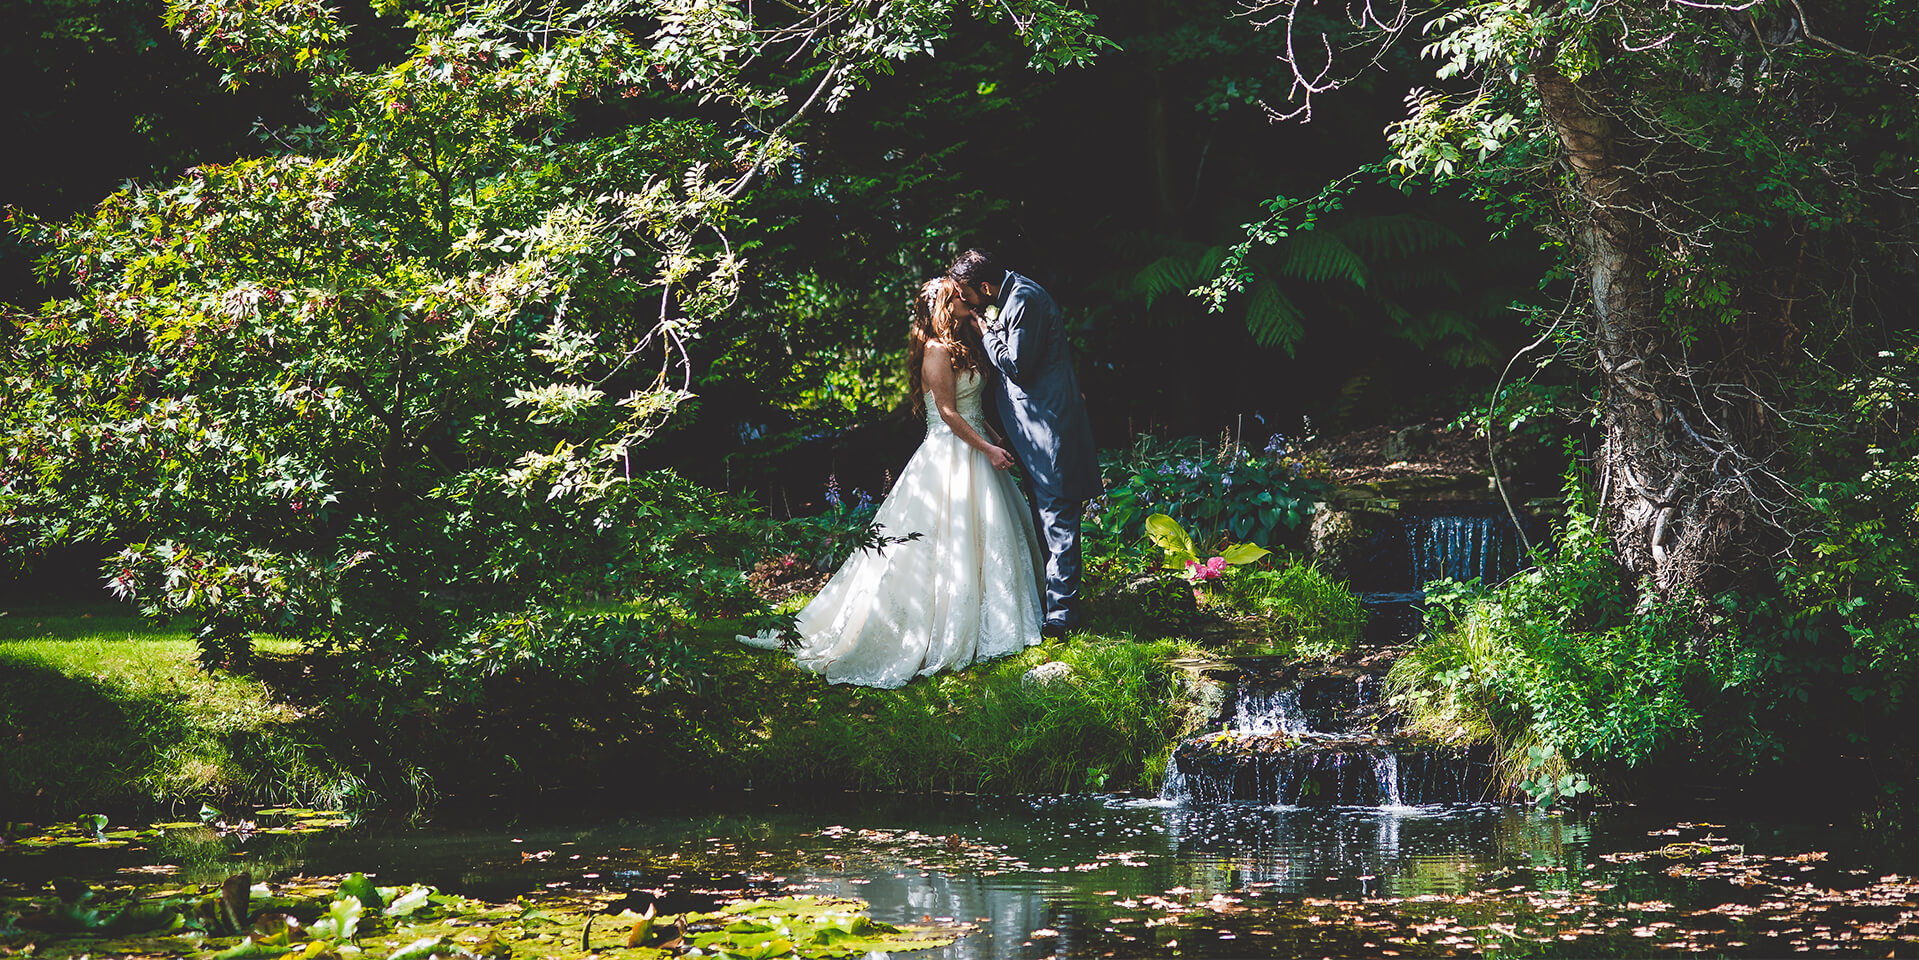 Rivervale Barn's gardens are the perfect place for stunning wedding photos